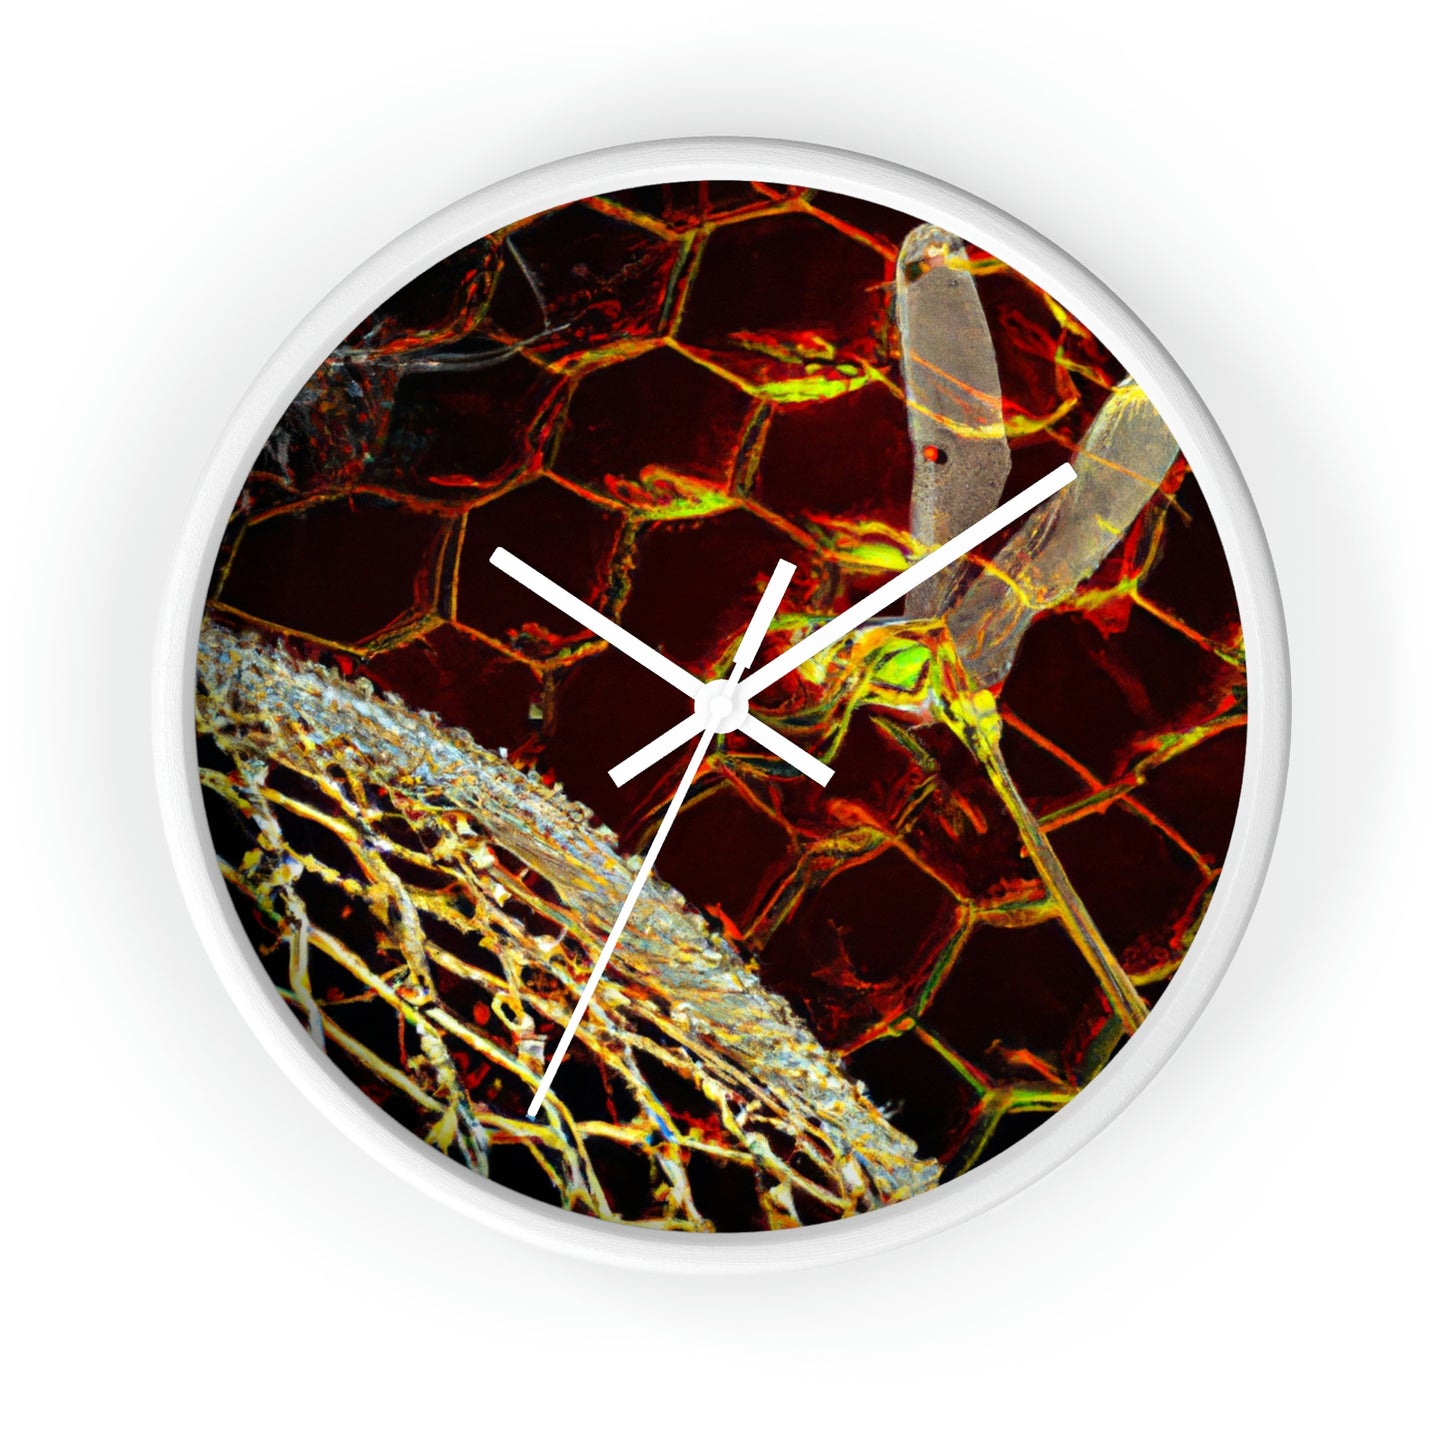 "The Dragonfly's Curse" - The Alien Wall Clock